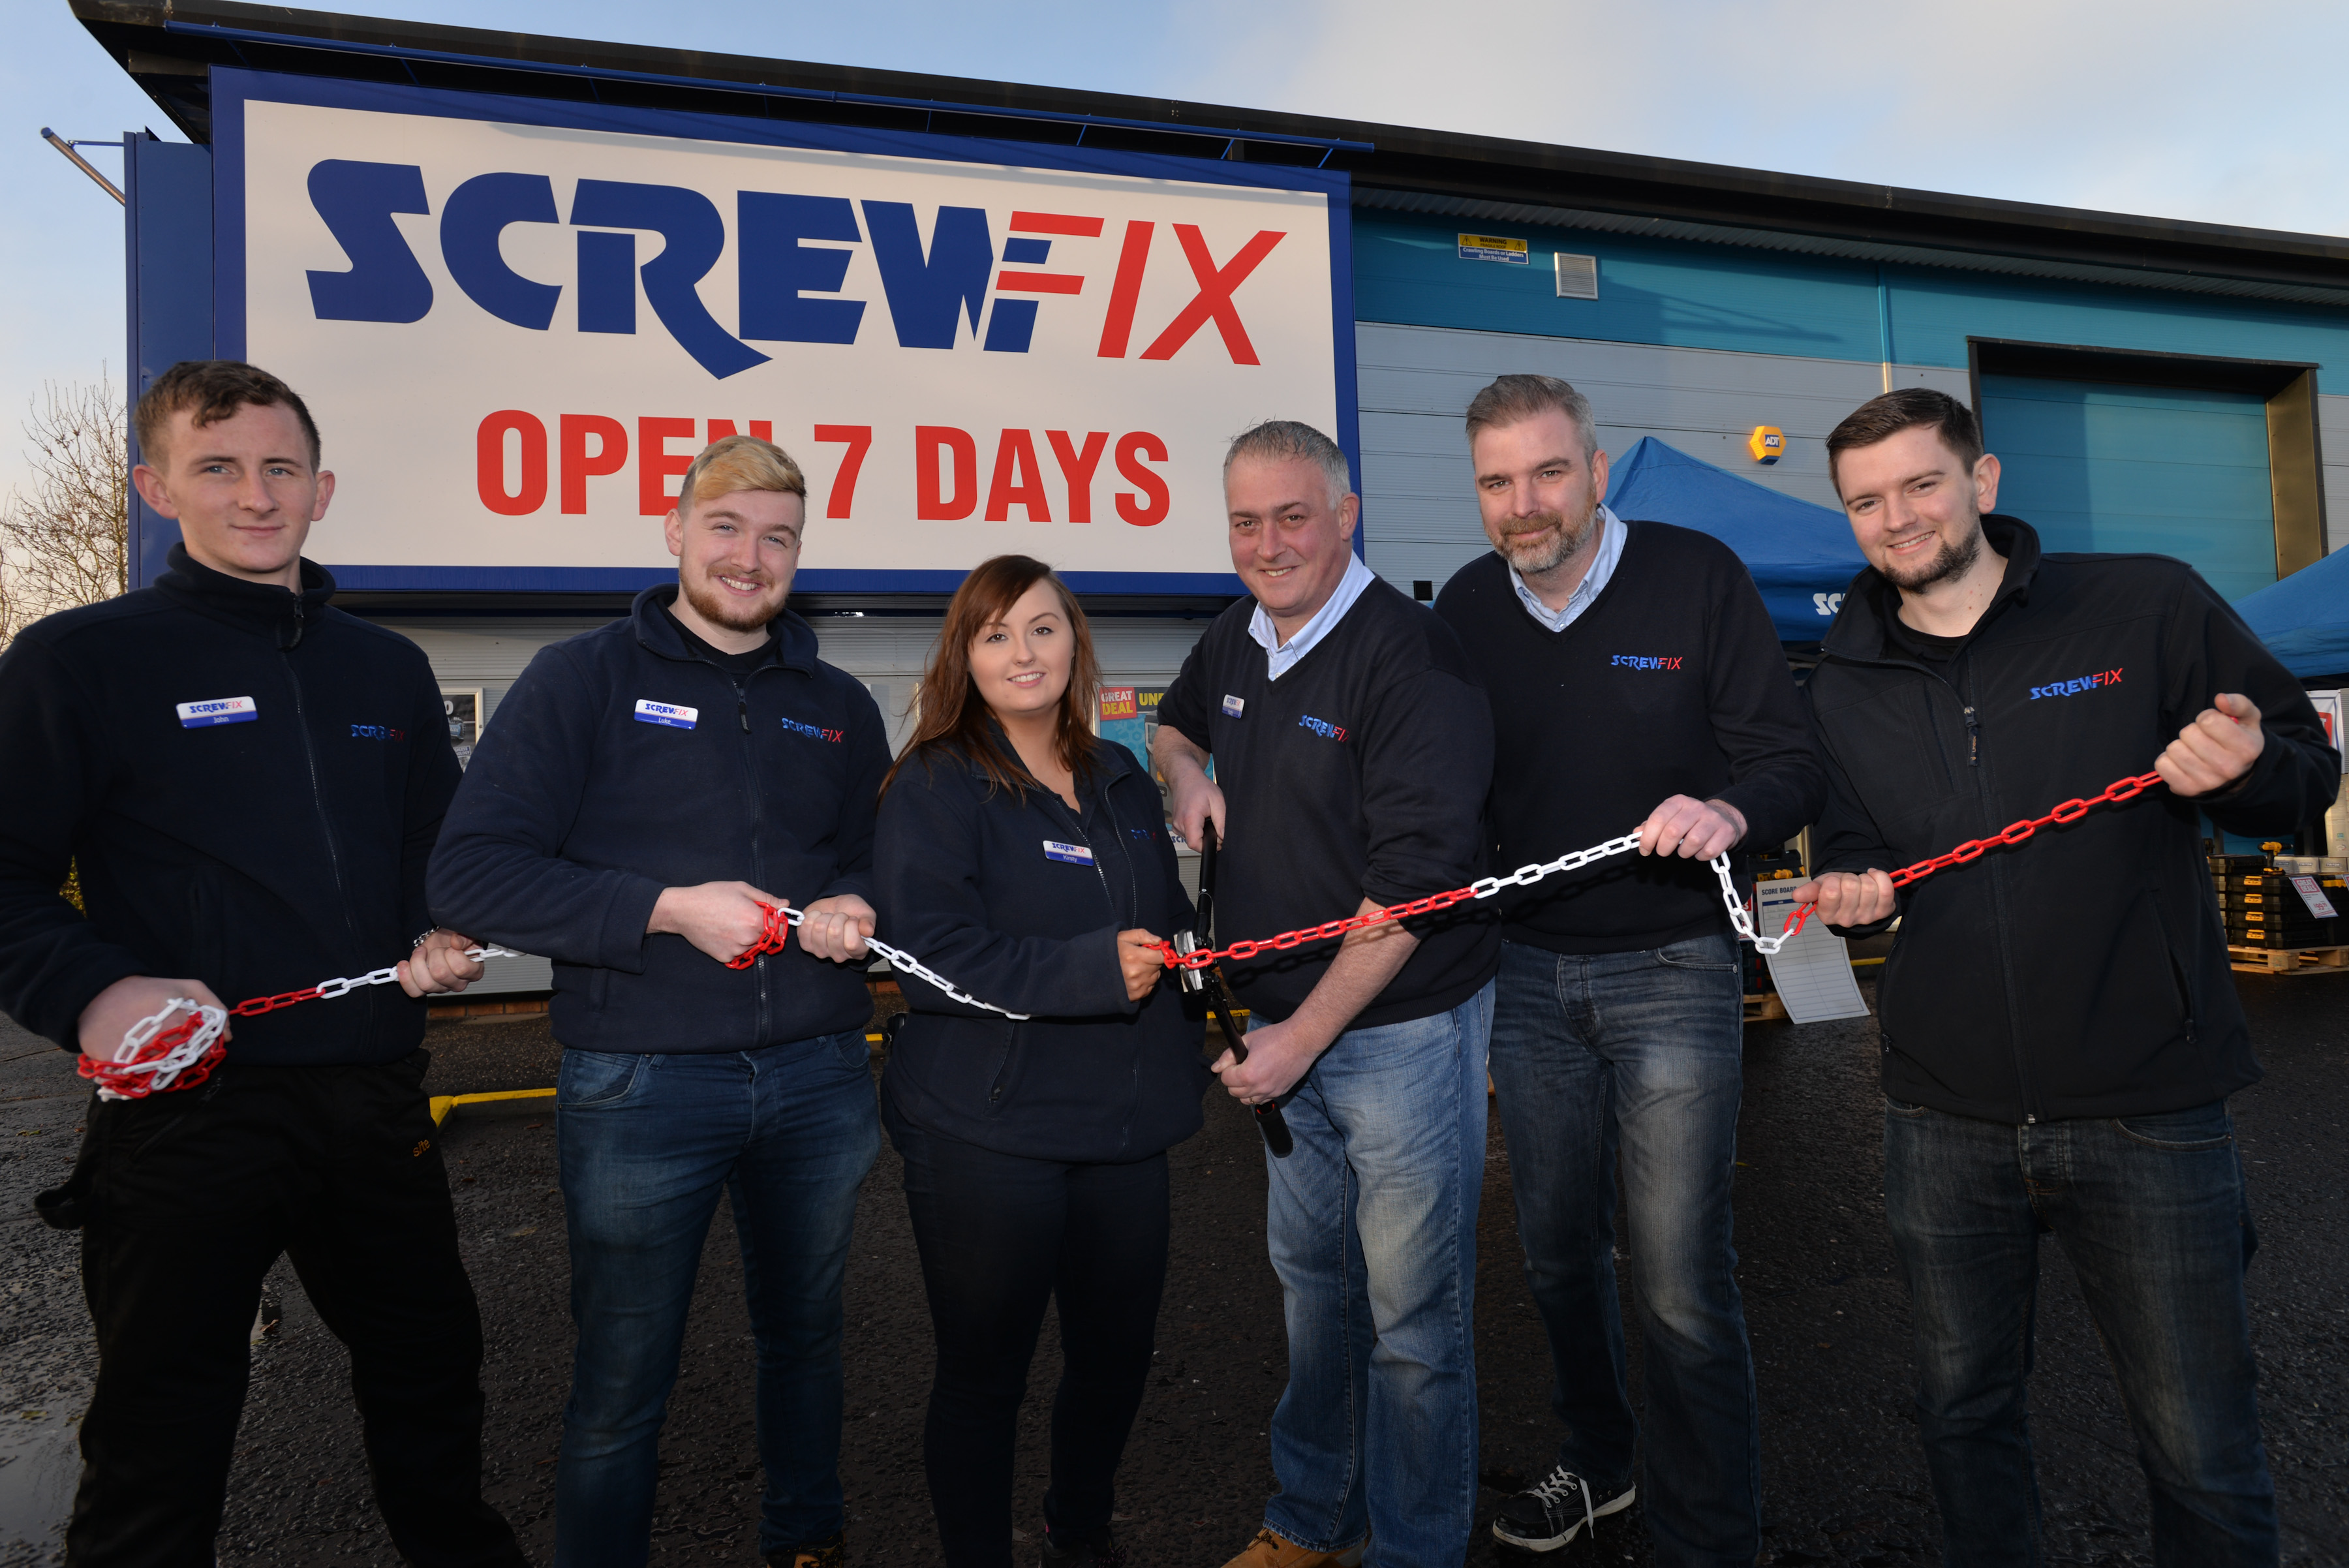 Screwfix welcomes hundreds of customers as new store in Newry opens